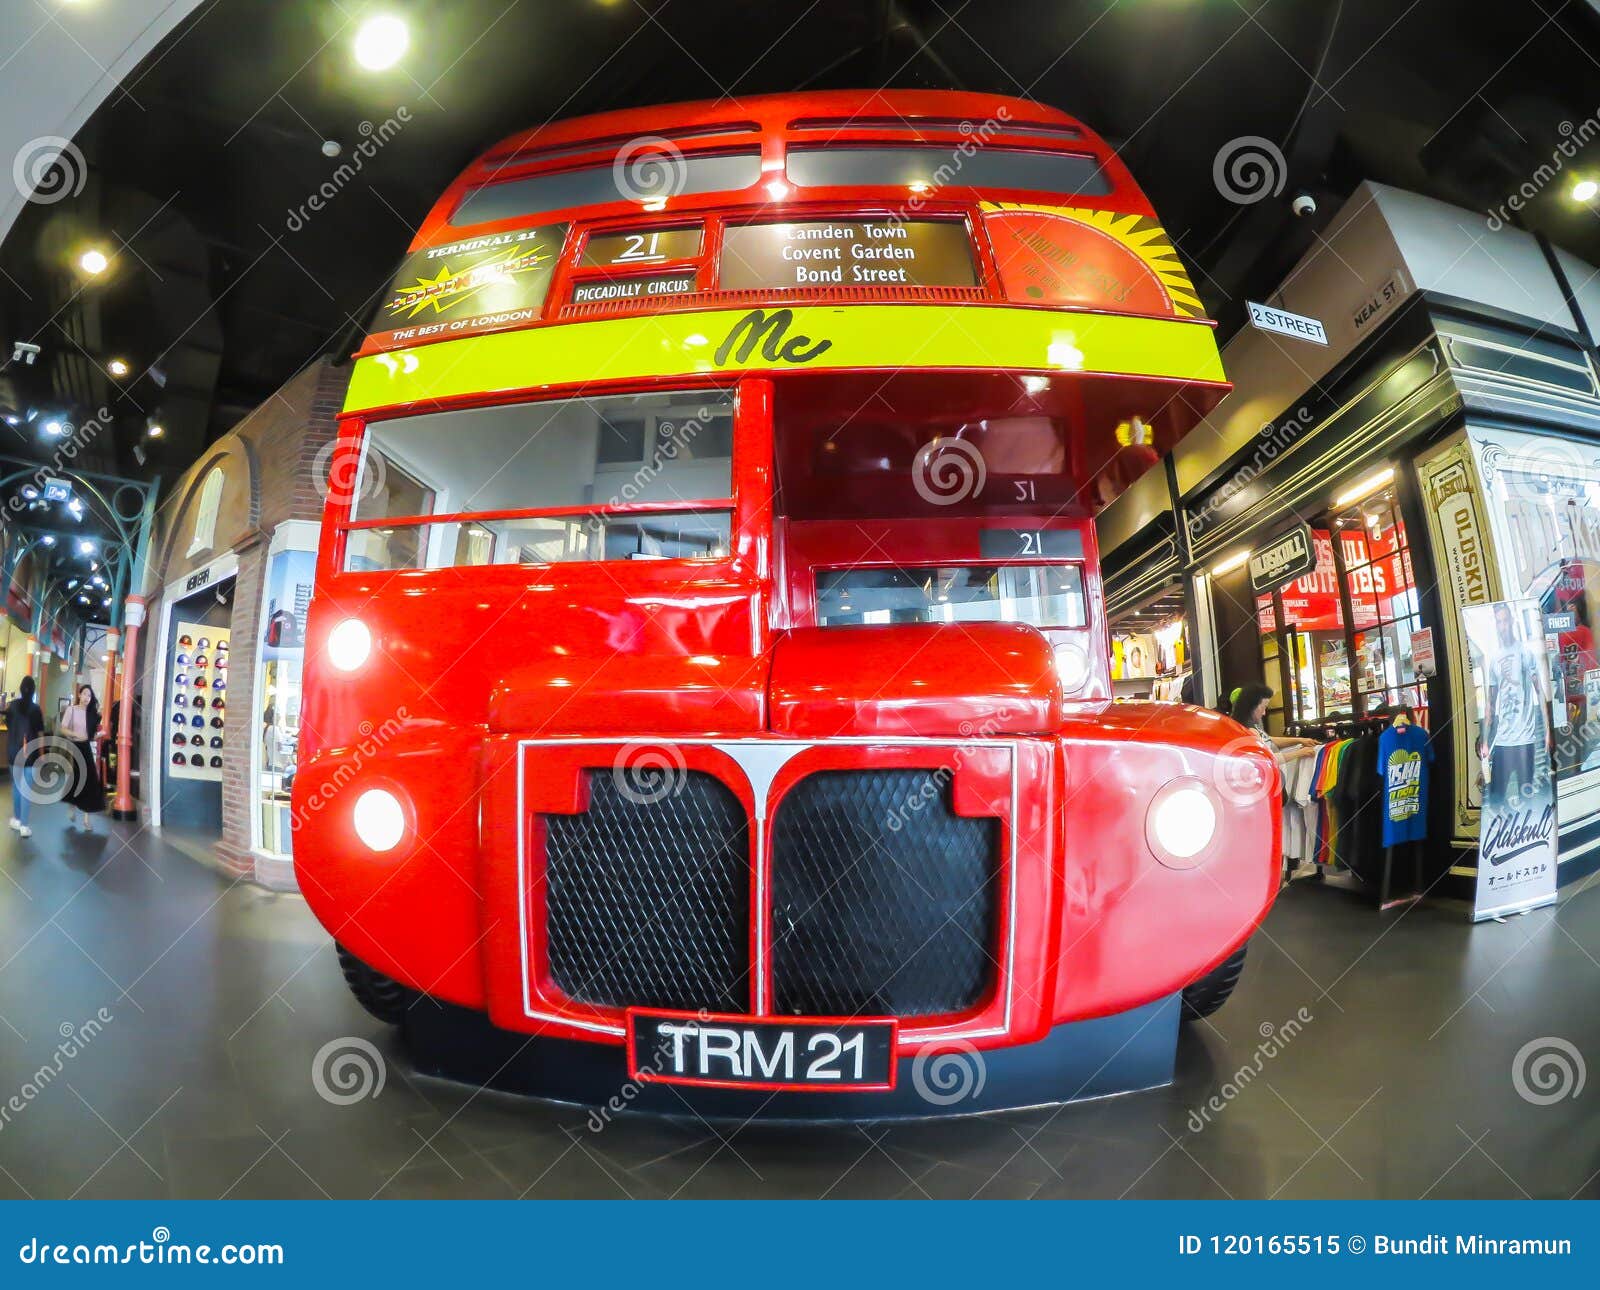 Mc Jeans Shop in Beautiful of Miniature London Double Decker Bus at Terminal 21 Shopping Mall. Editorial Image - Image of editorial, england: 120165515